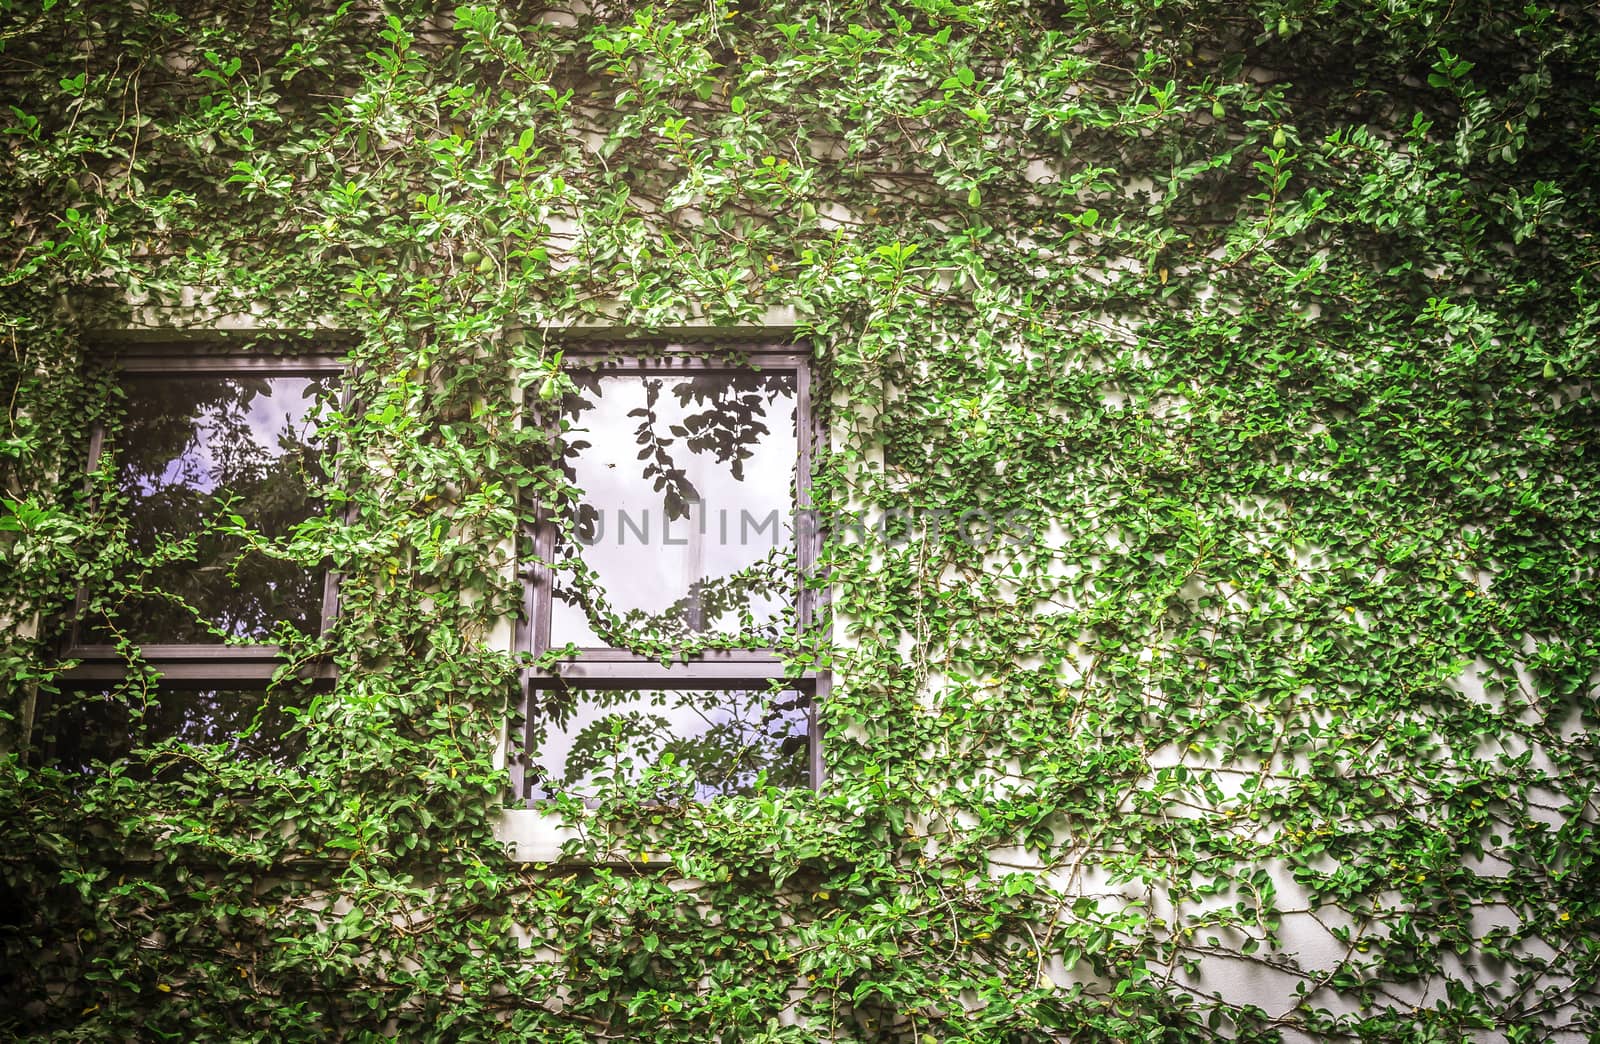 Green leaf covering building wall with windows